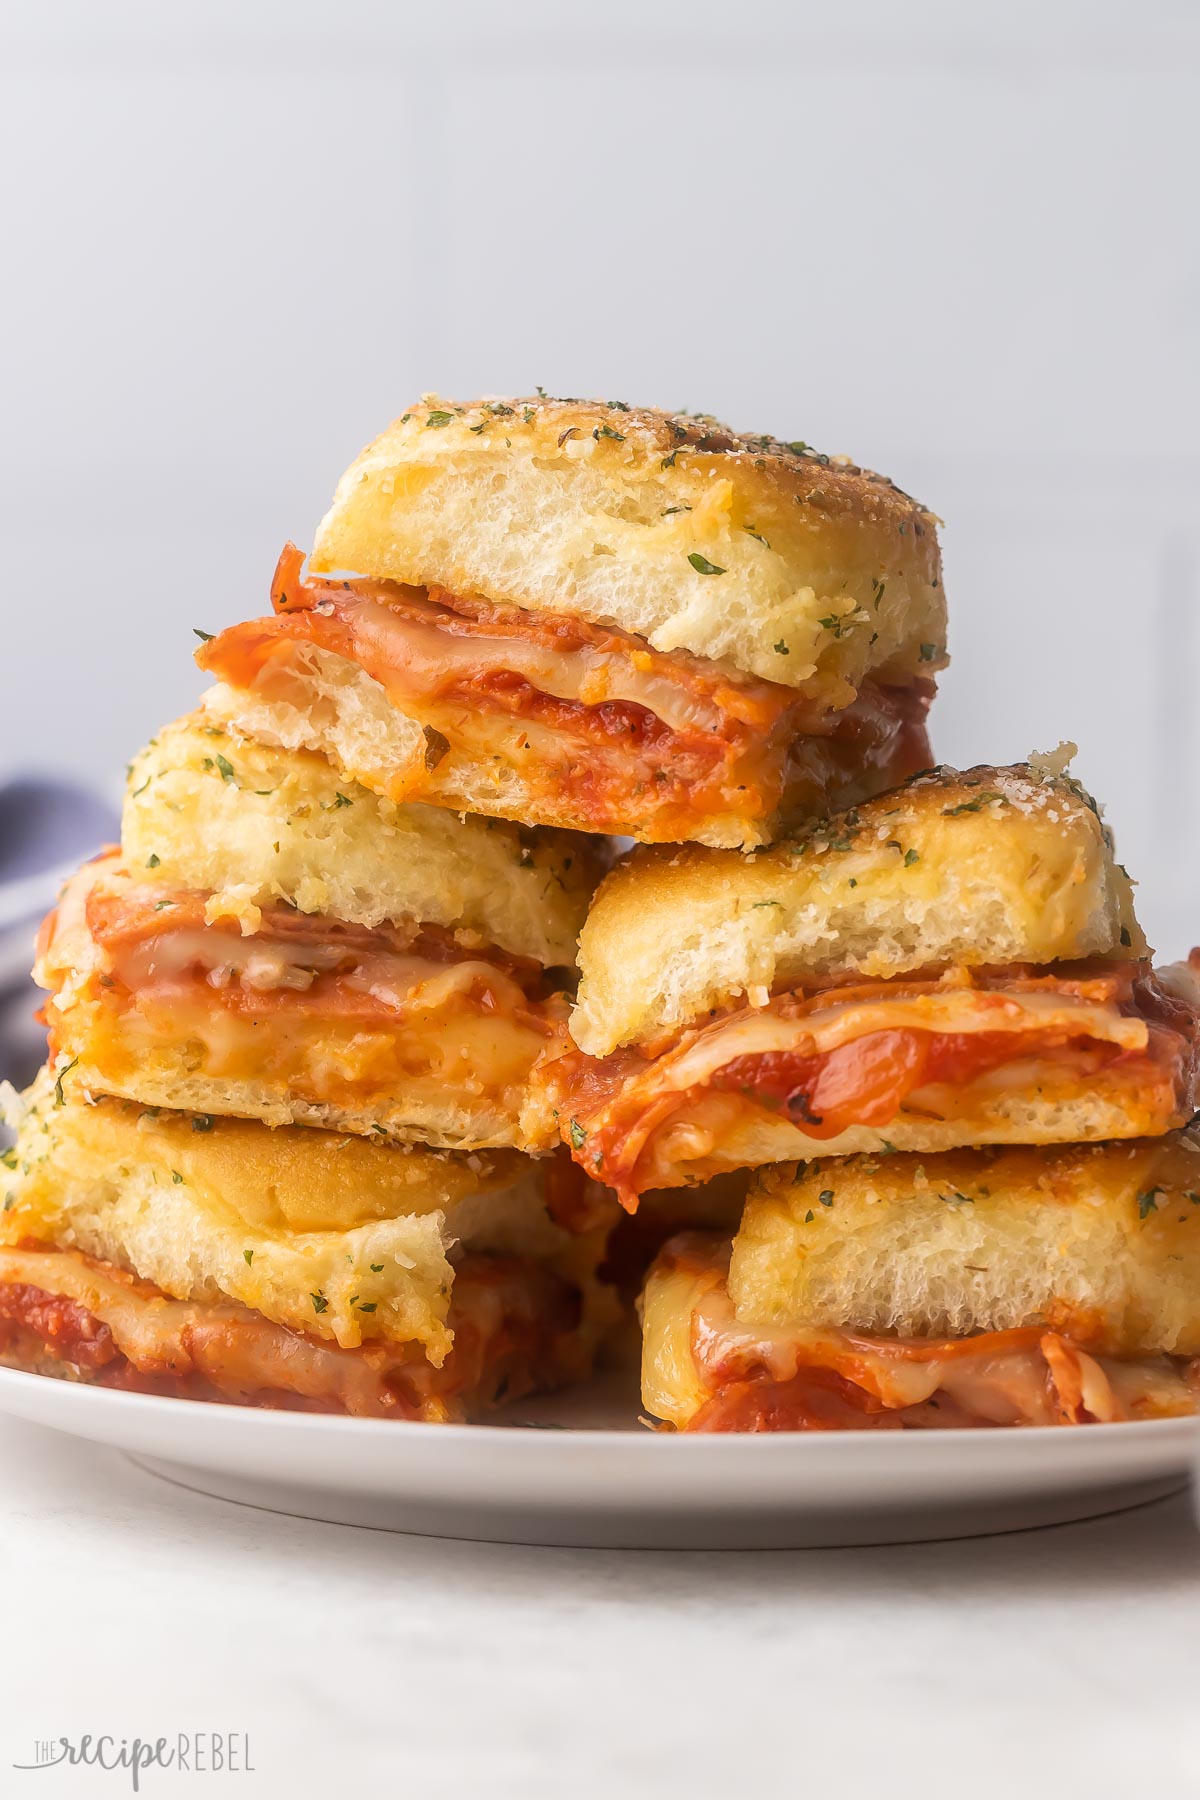 Stack of pizza sliders on a plate.